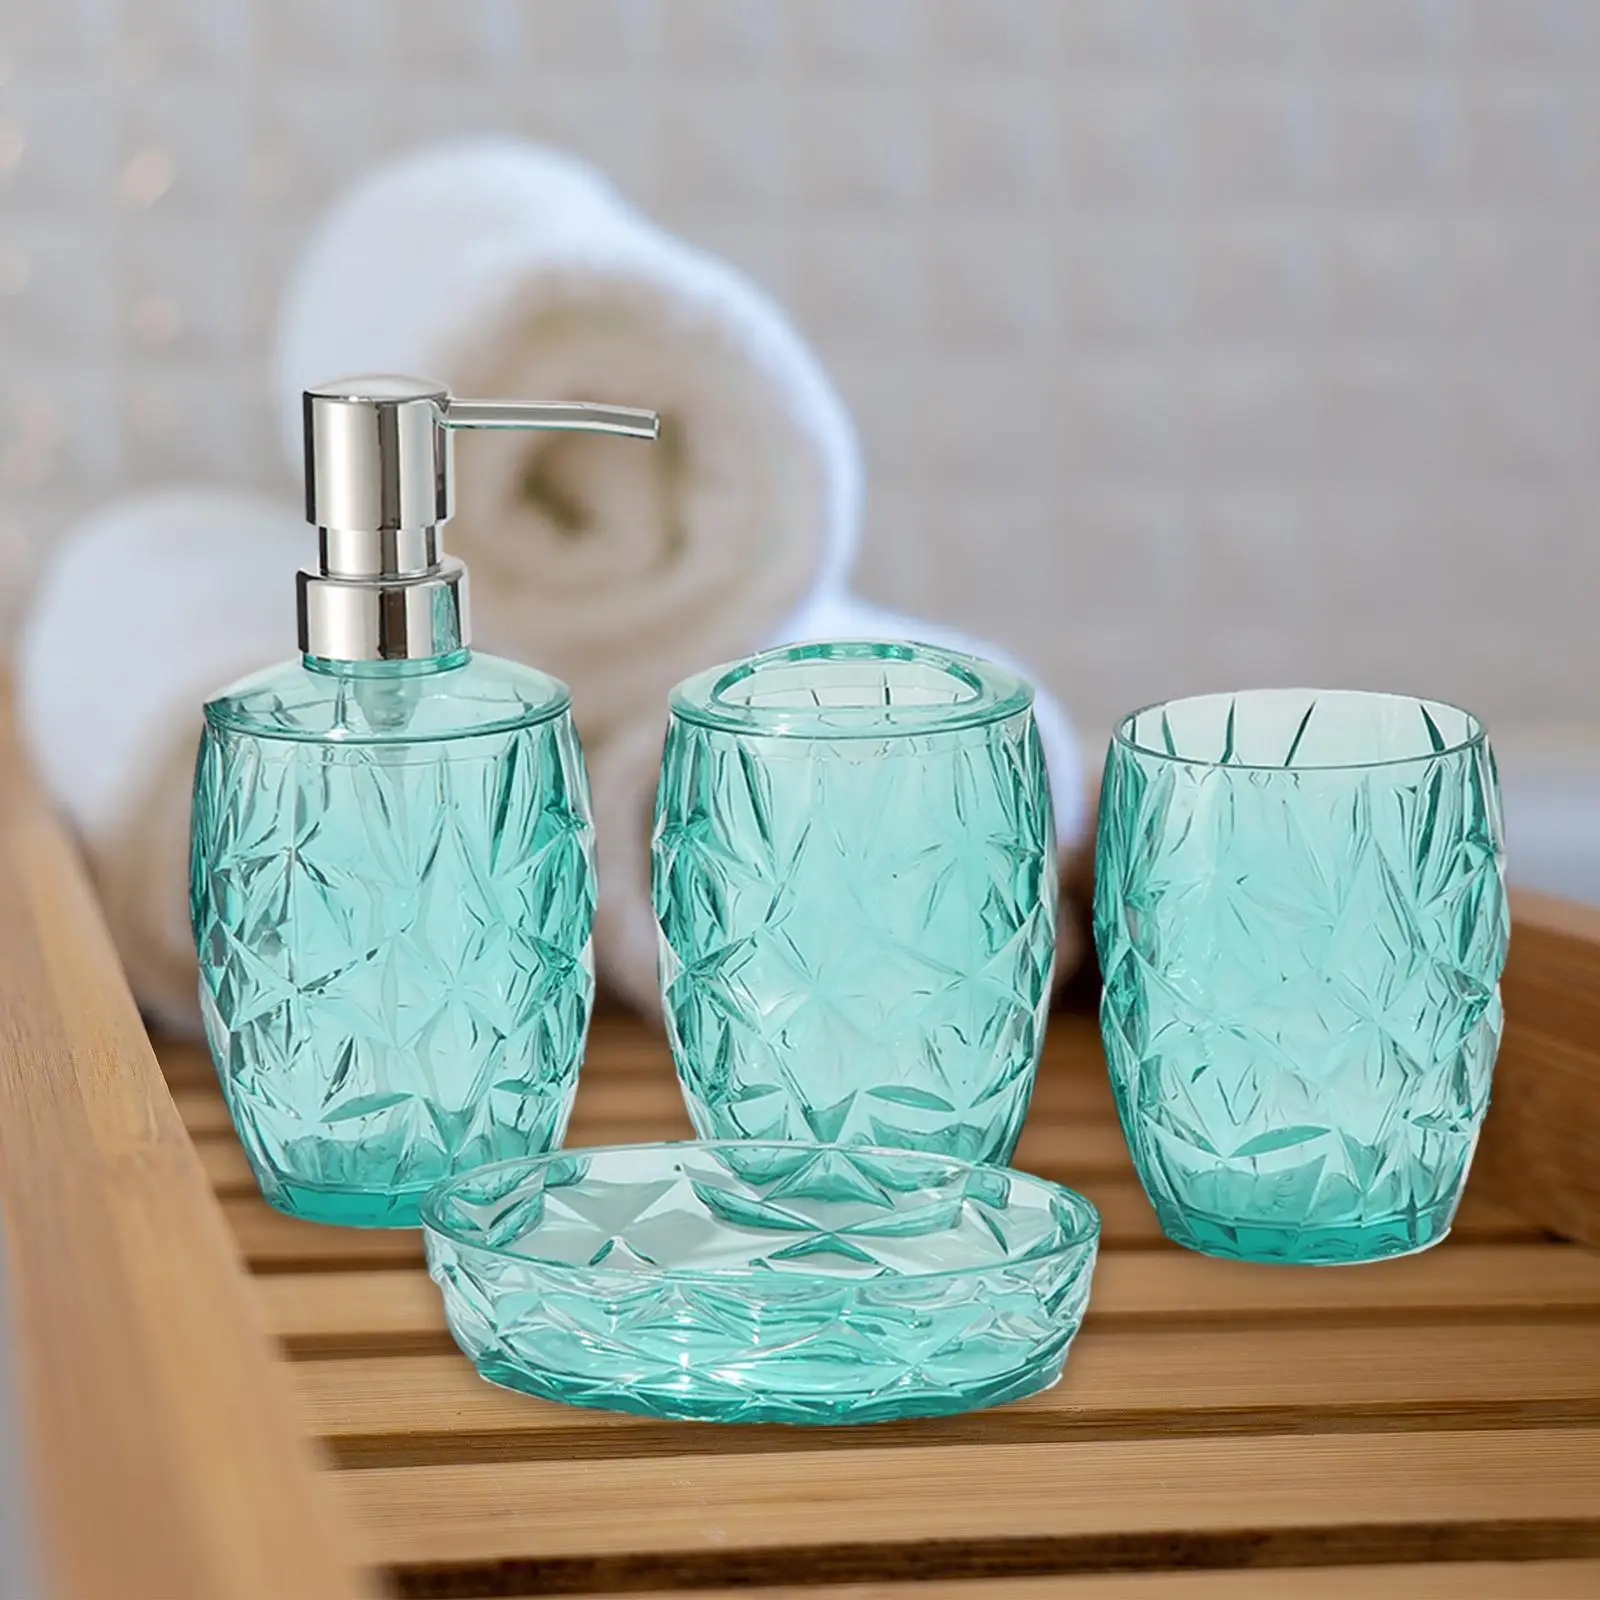 4 Pieces Lotion Bottles Toothbrush Holder Soap Dish Bathroom Accessory Set for Home Vanity Countertop Bathroom Apartment